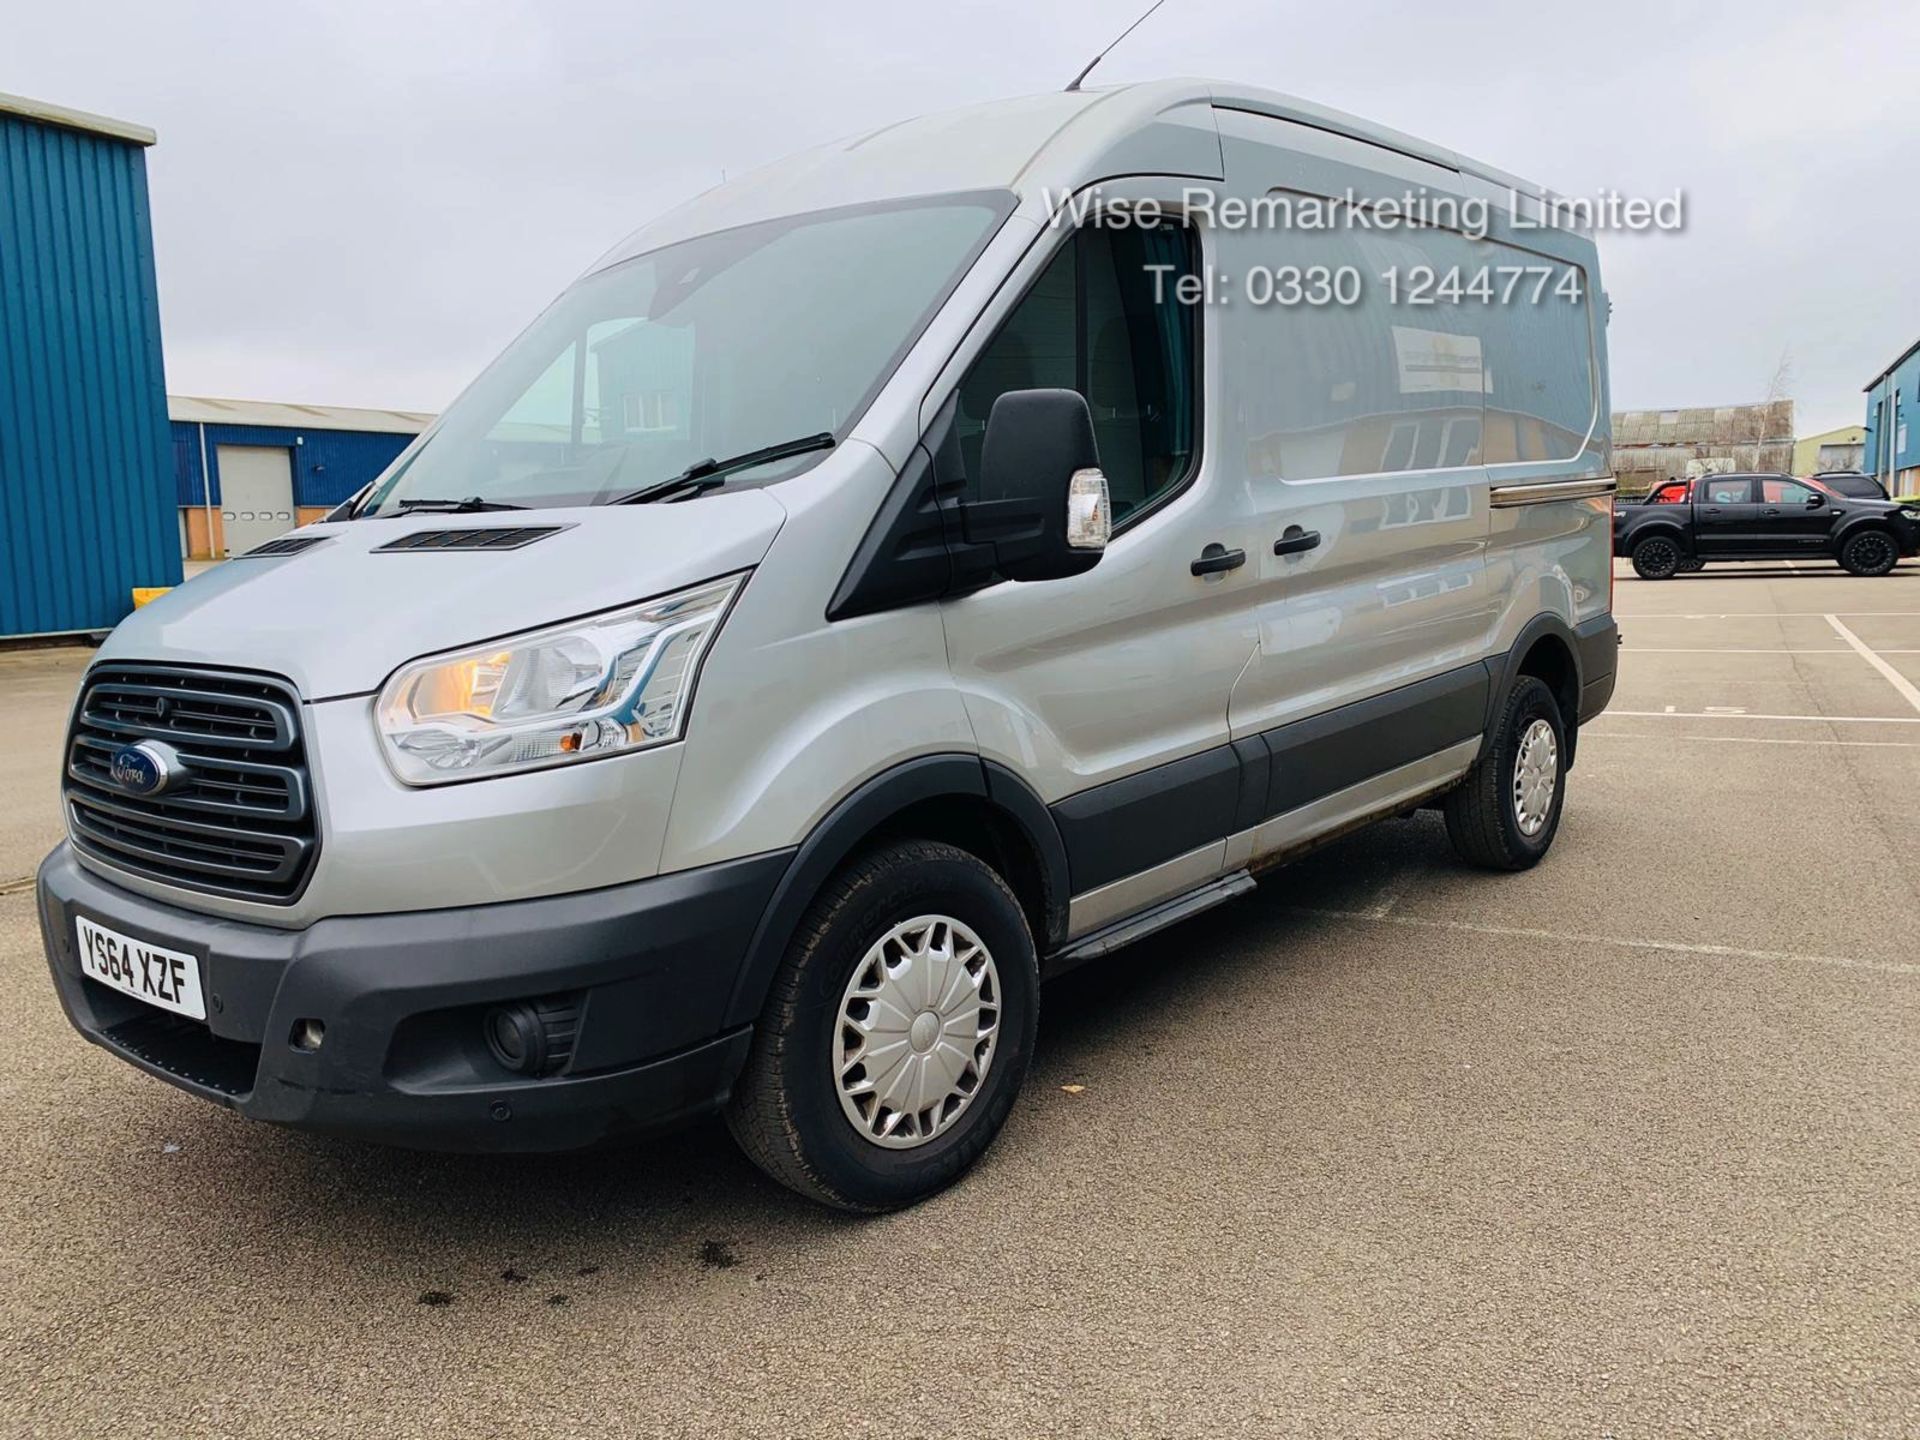 Ford Transit 350 2.2 TDCI Trend Van - 2015 Reg - Silver - 6 Speed - Ply Lined - Image 4 of 20